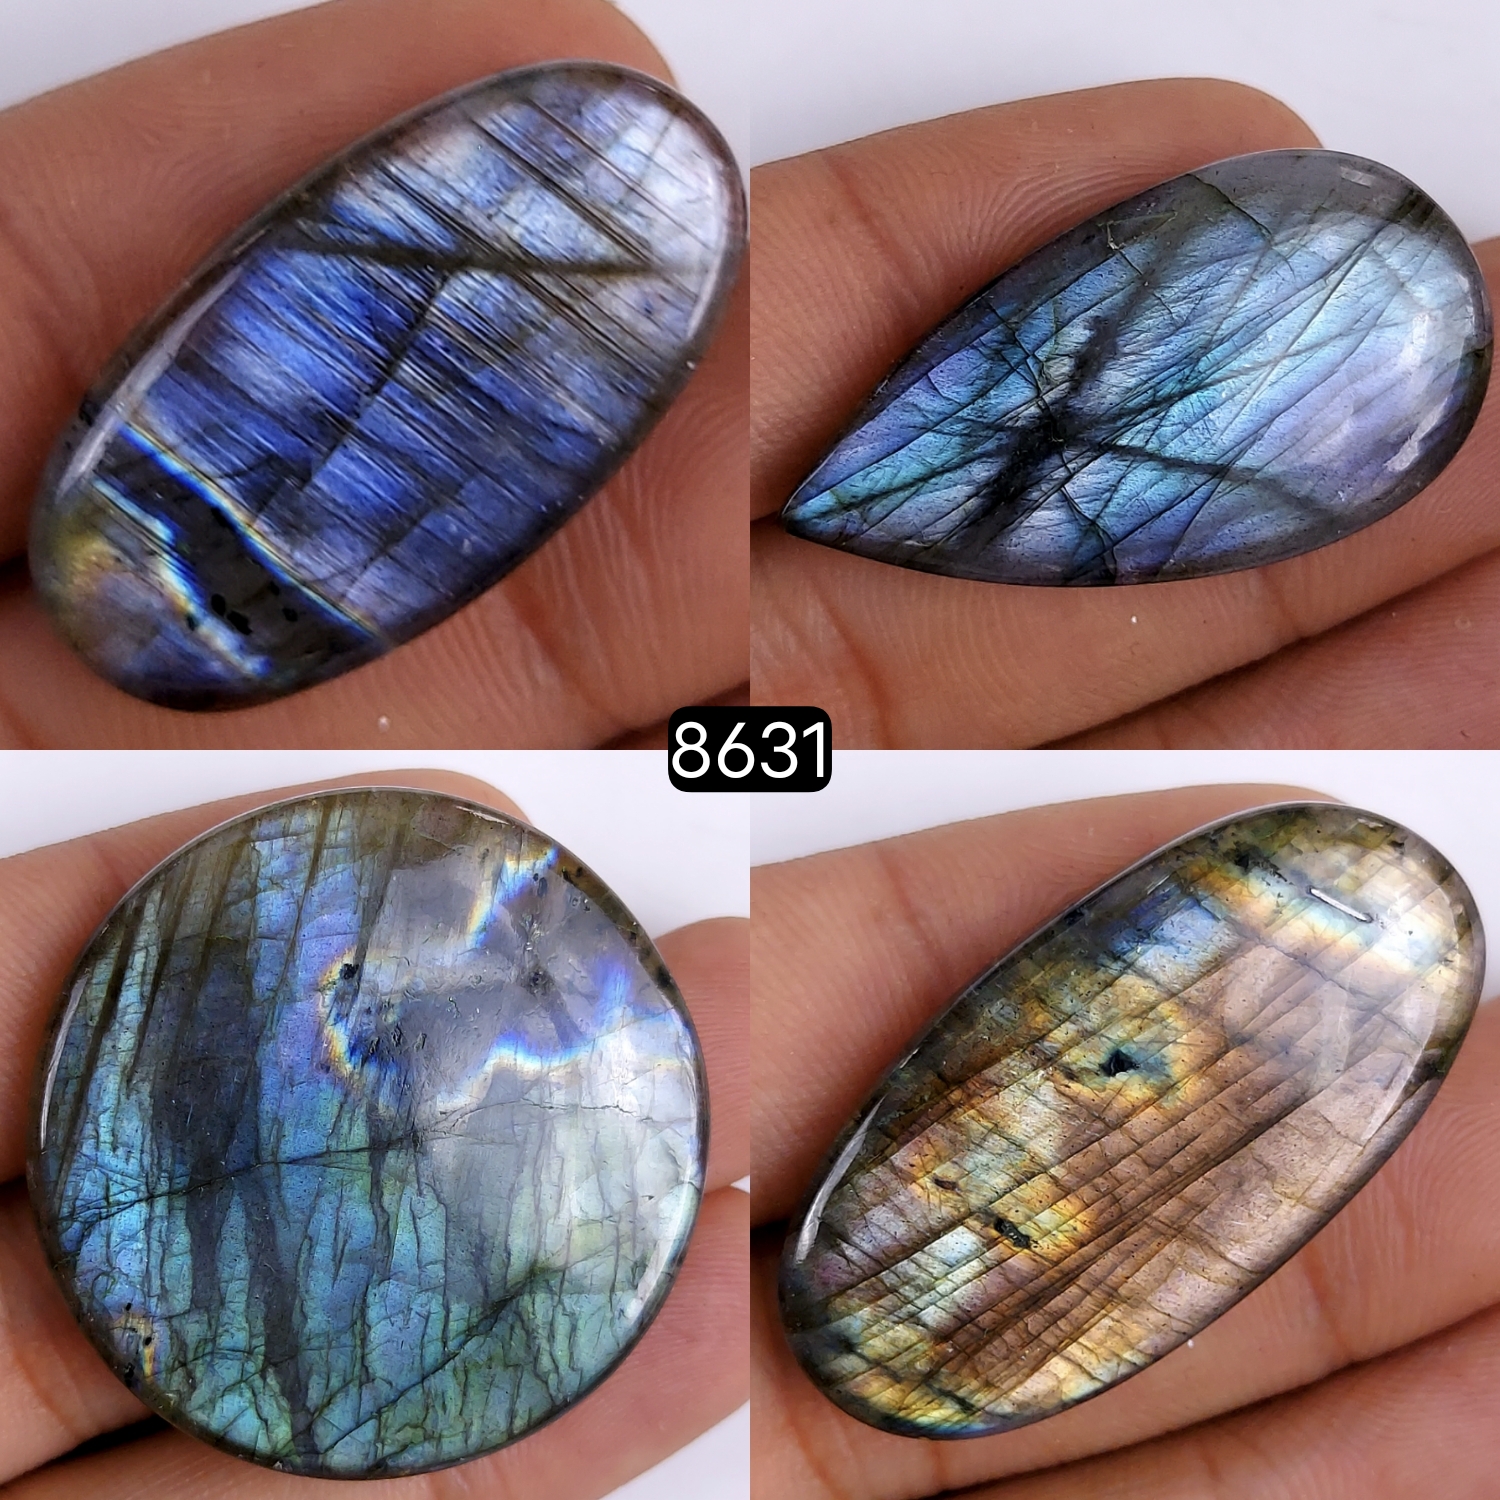 4Pcs 192Cts Natural Purple Fire Labradorite Cabochon Loose Gemstone Lot For Jewelry Making 38x38 32x16mm #8631